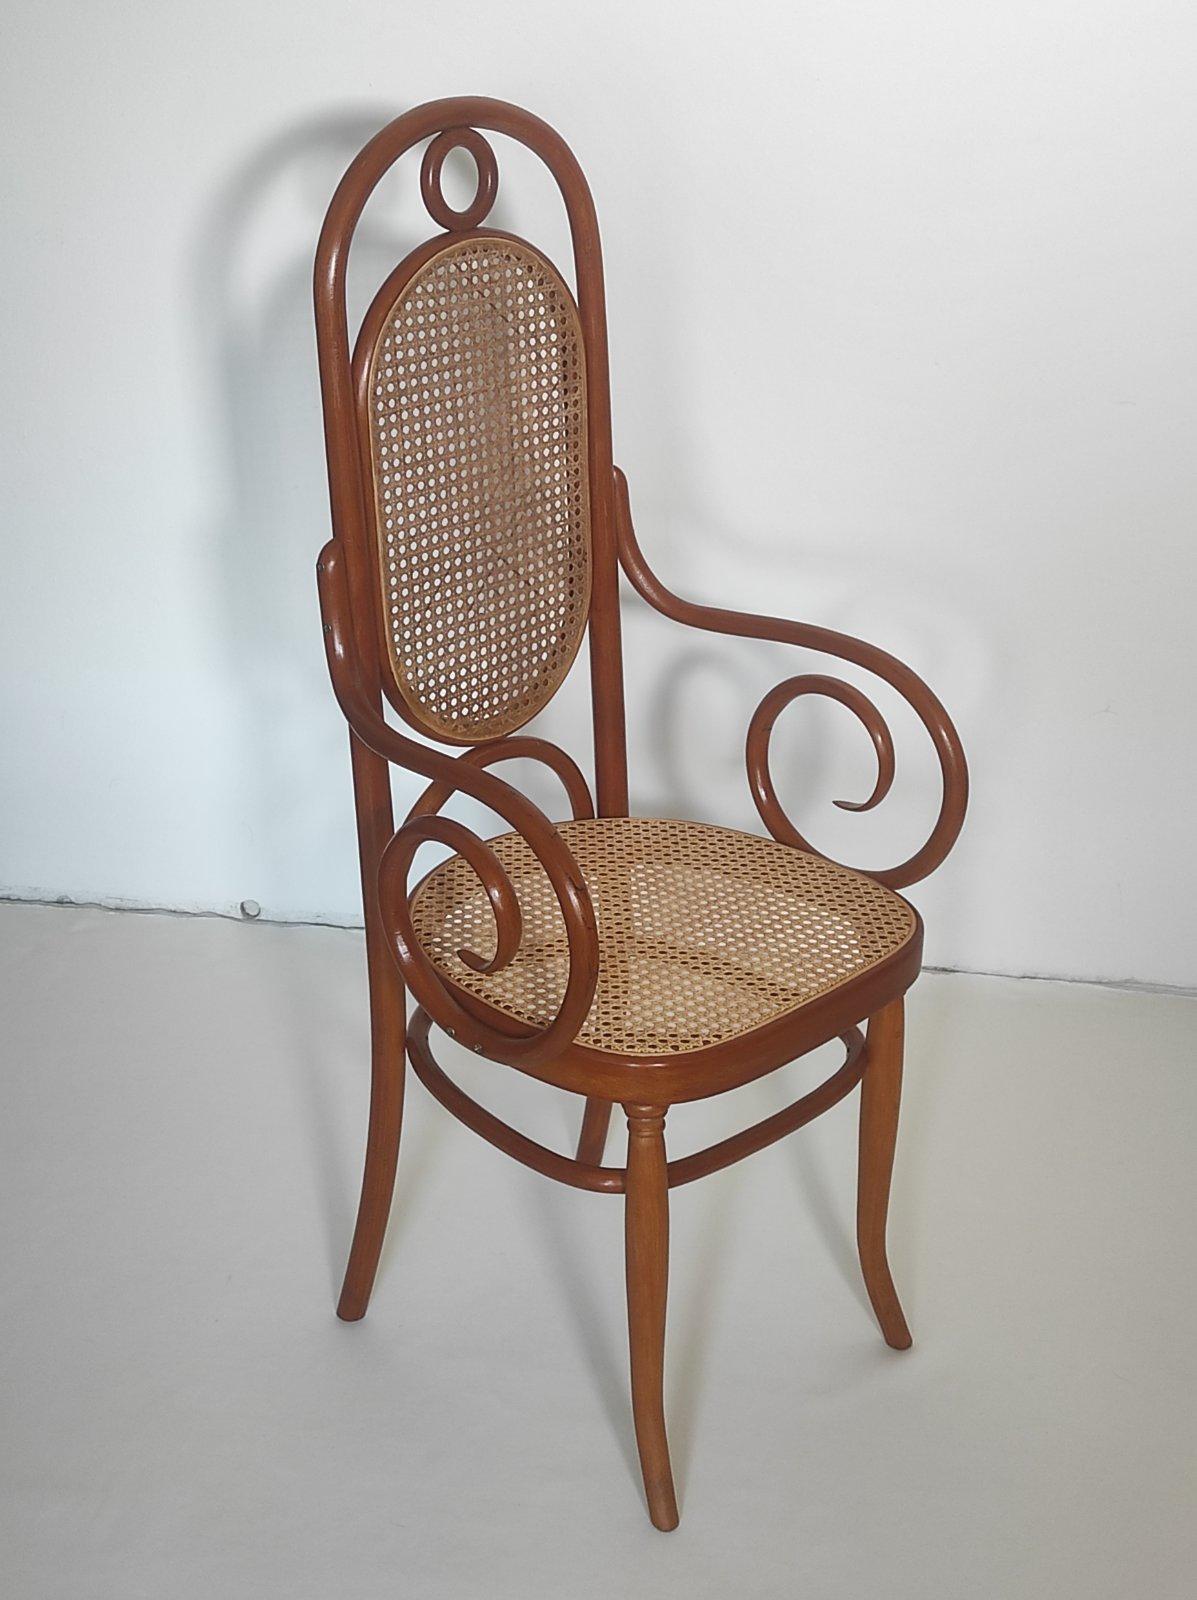 Vintage Stol Kamnik no 17 chair attributed to Thonet